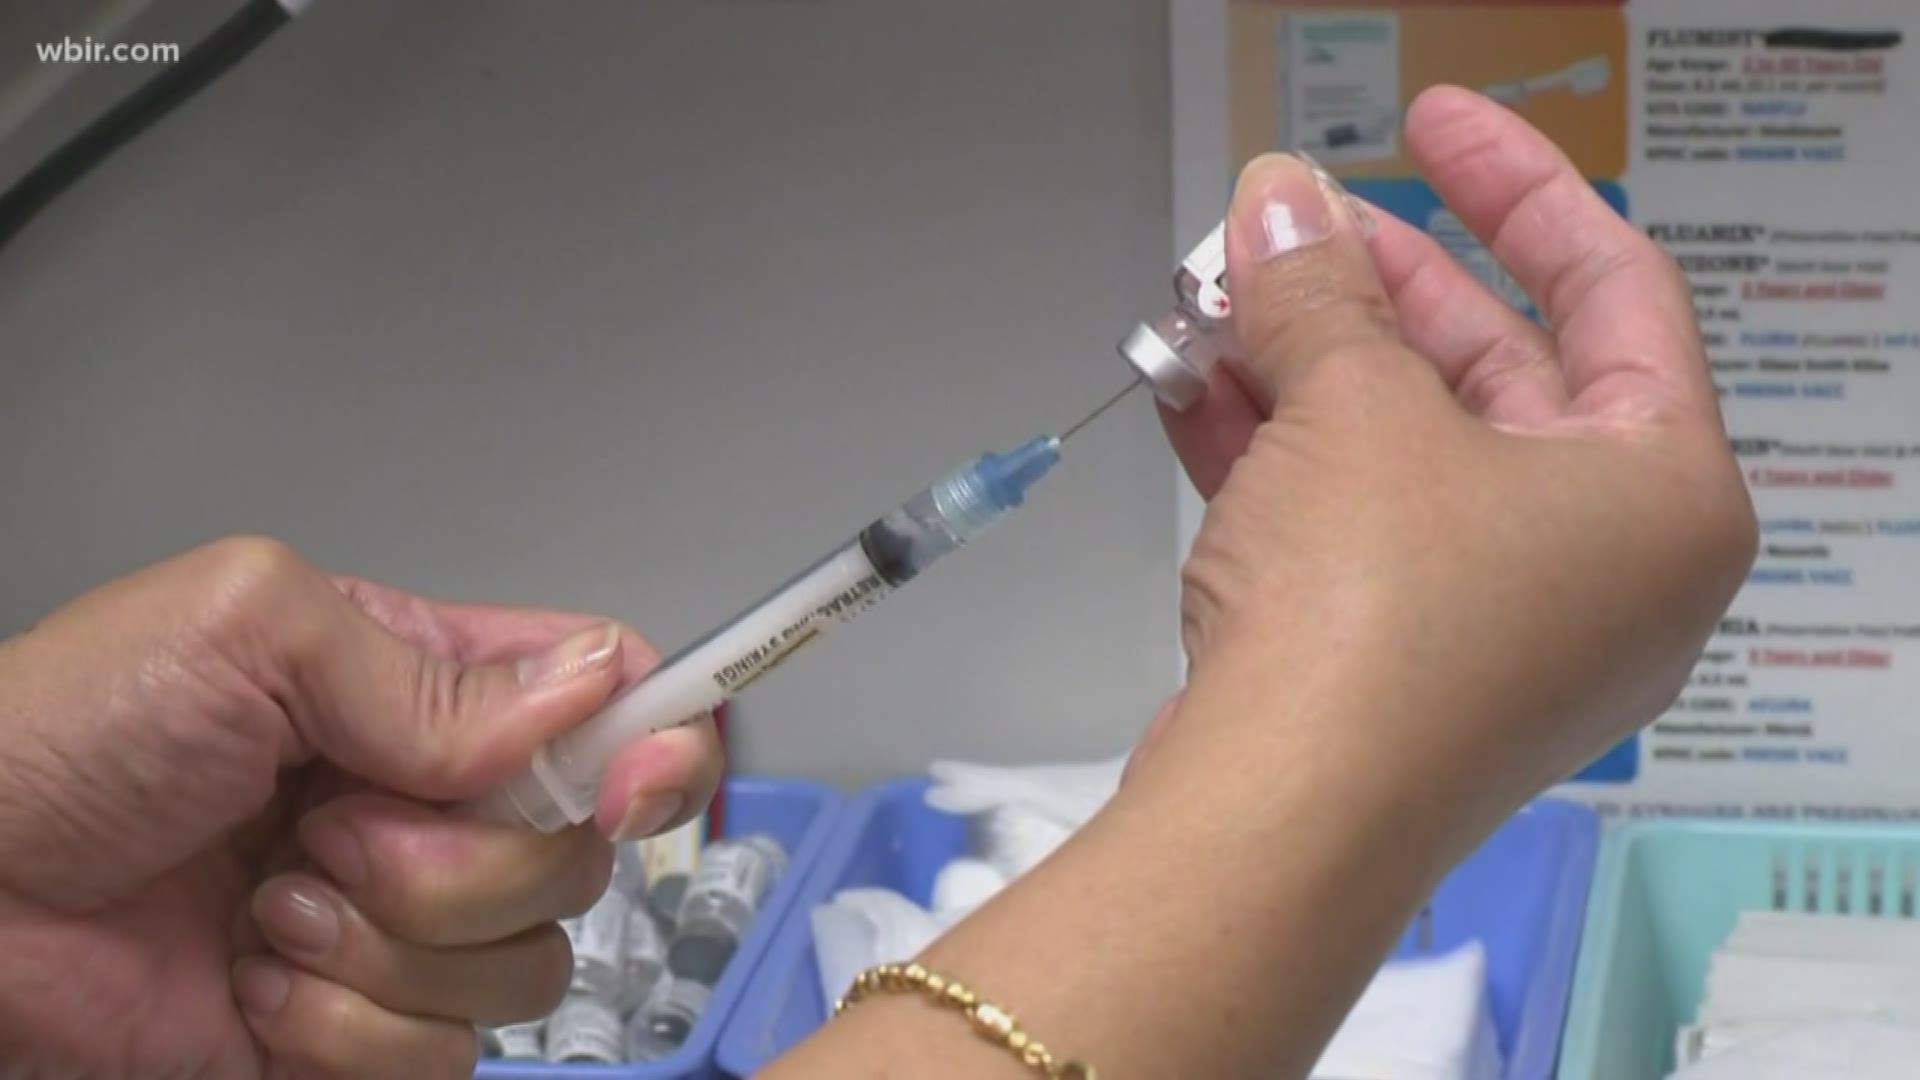 The CDC says 80% of people the in the U.S. will contract HPV at some time in their lives.